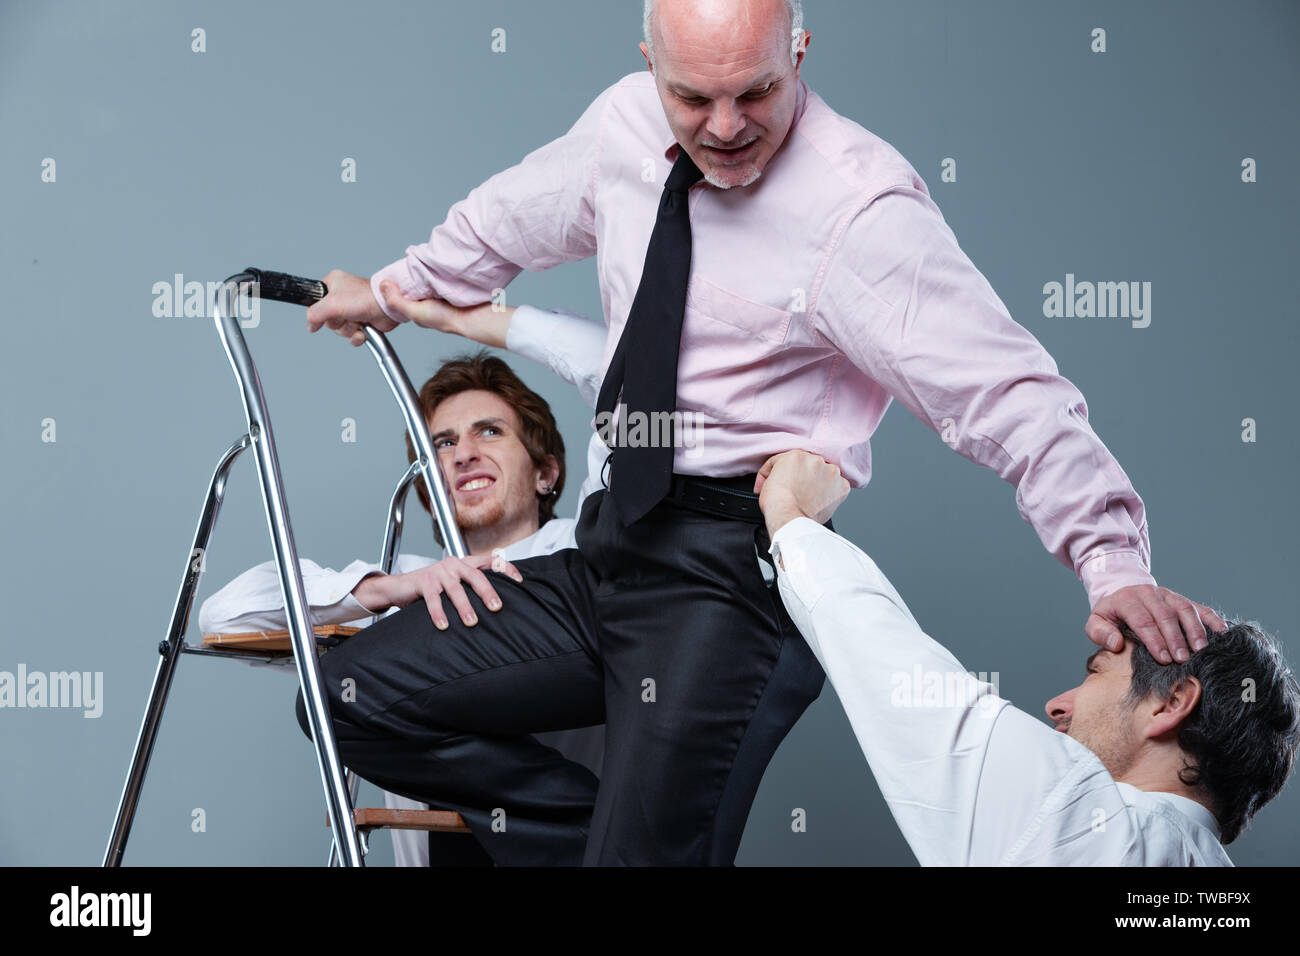 Ambition and climbing the corporate ladder concept with a senior businessman fighting off younger colleagues wishing to displace him from his position Stock Photo